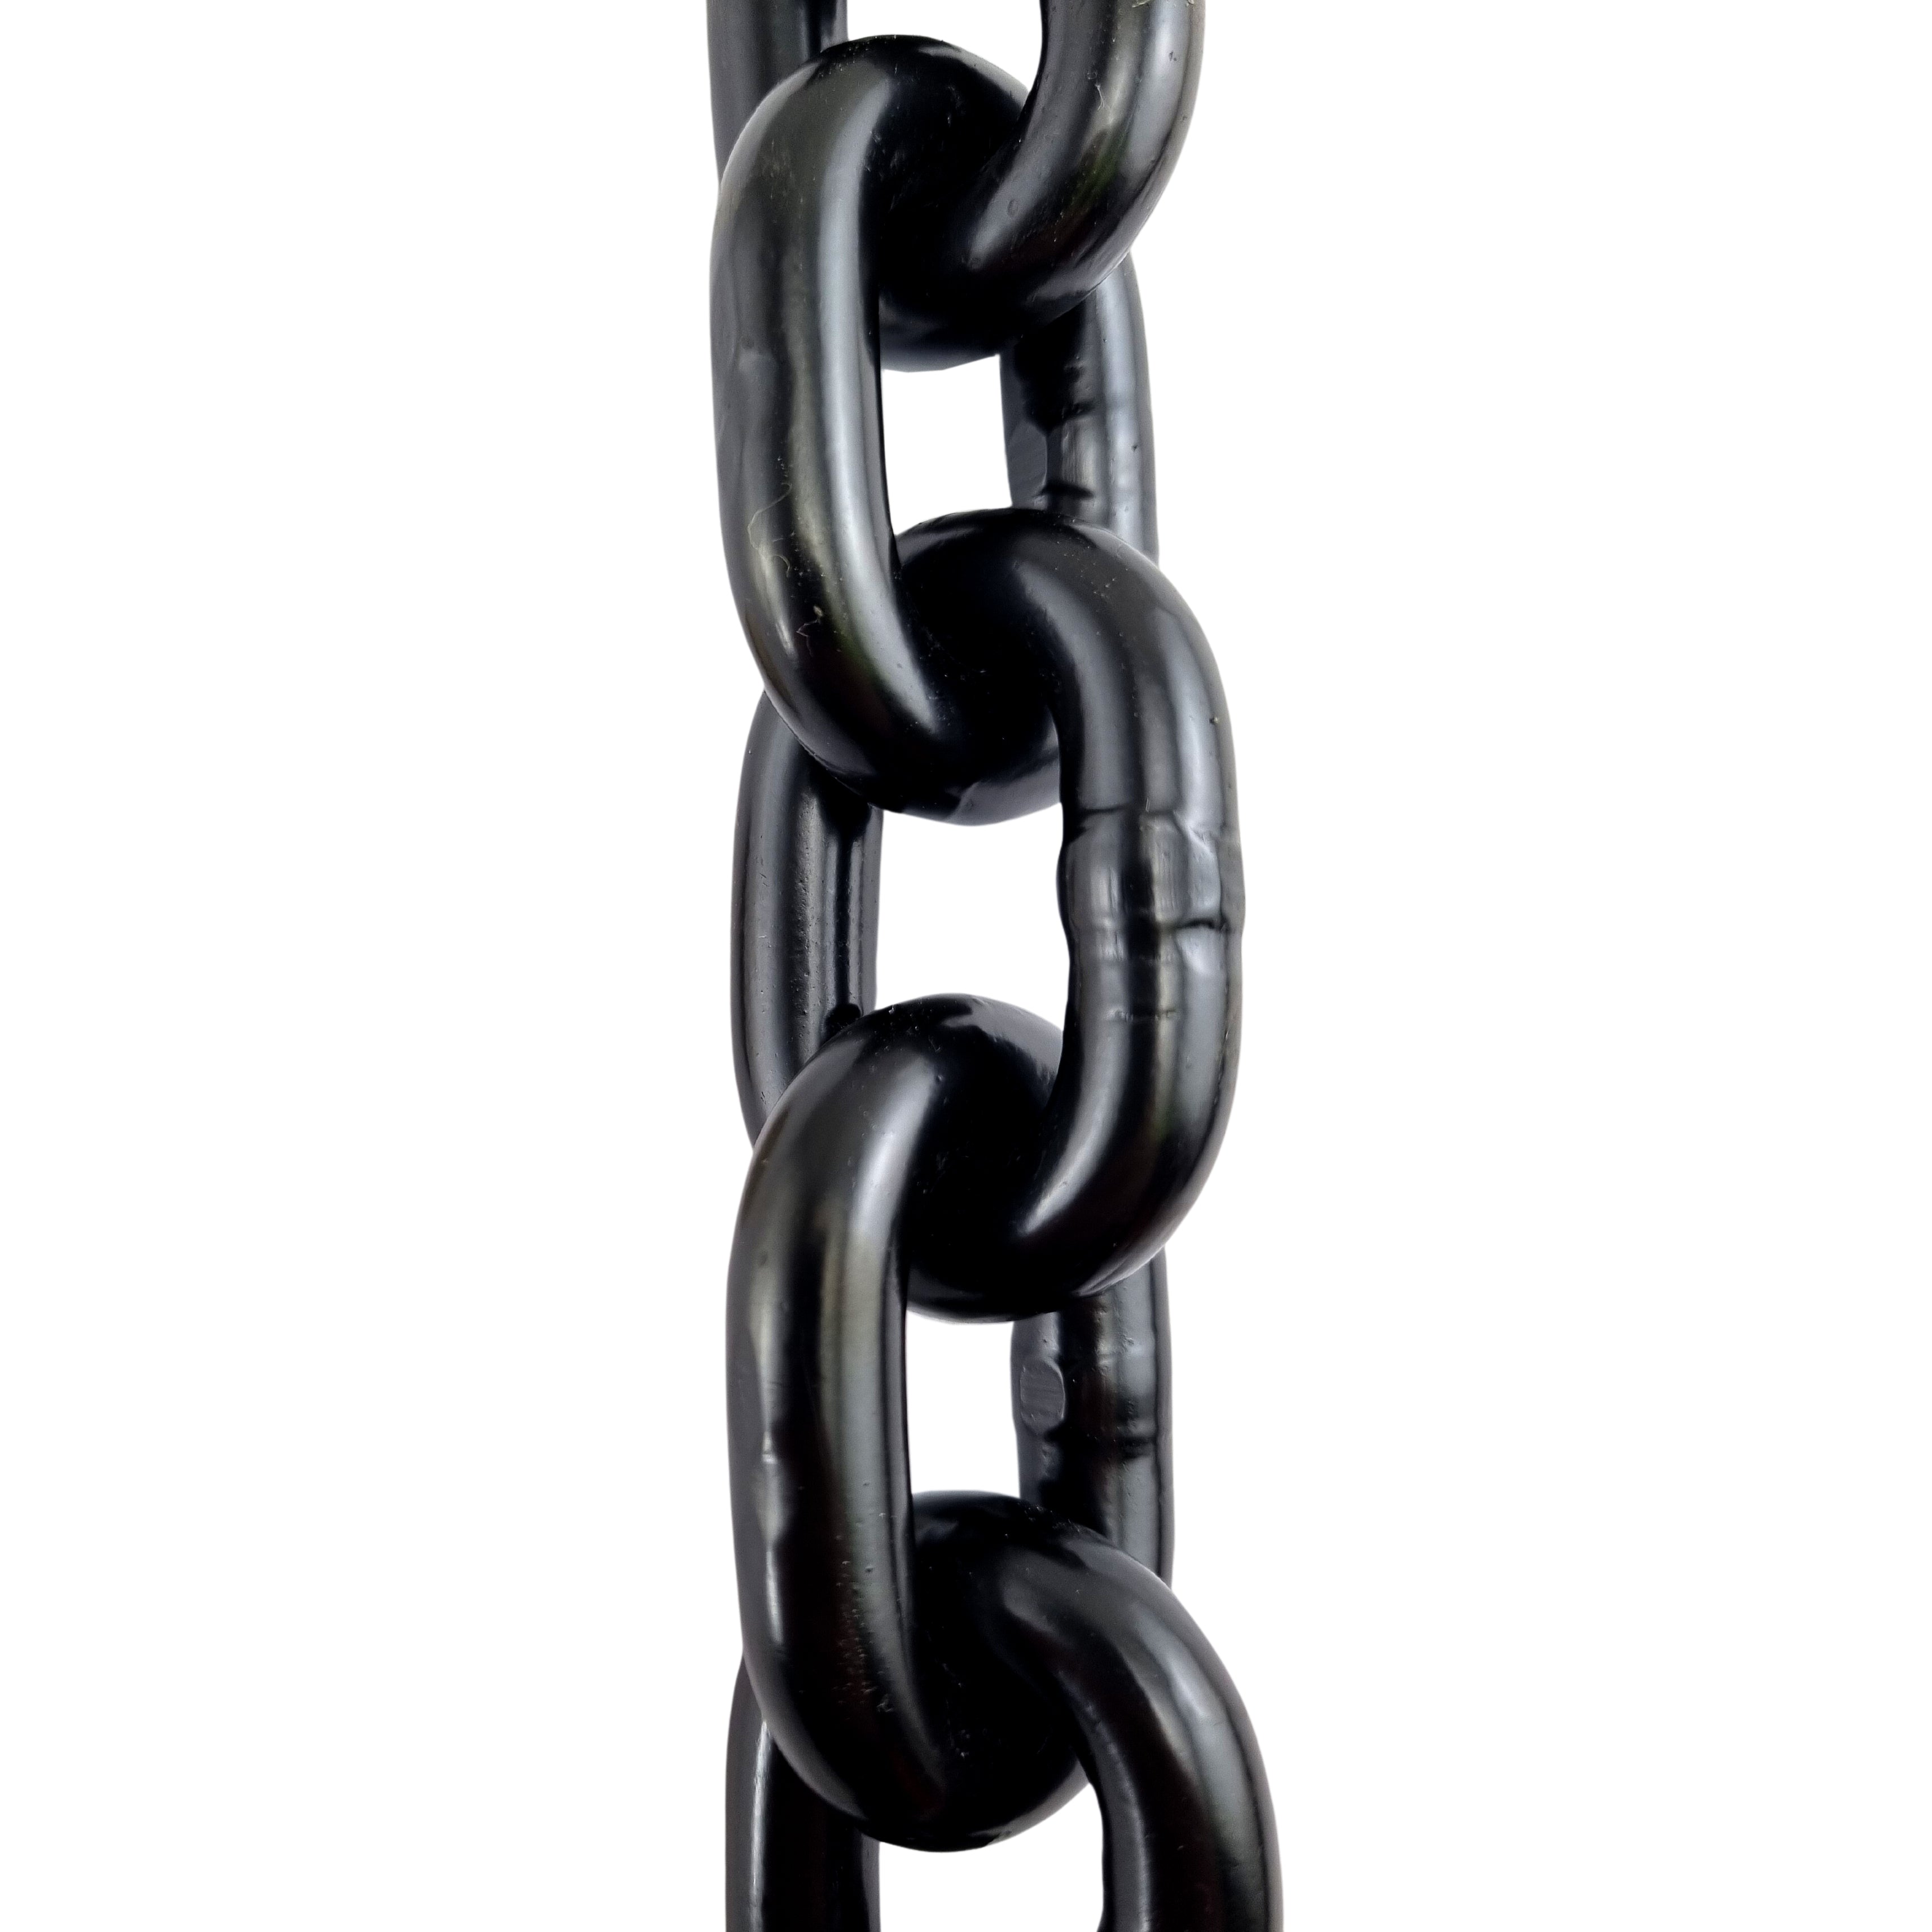 Lifting Chain - Black Steel - Tested & Rated. Shop chain online at chain.com.au. Australia wide shipping.